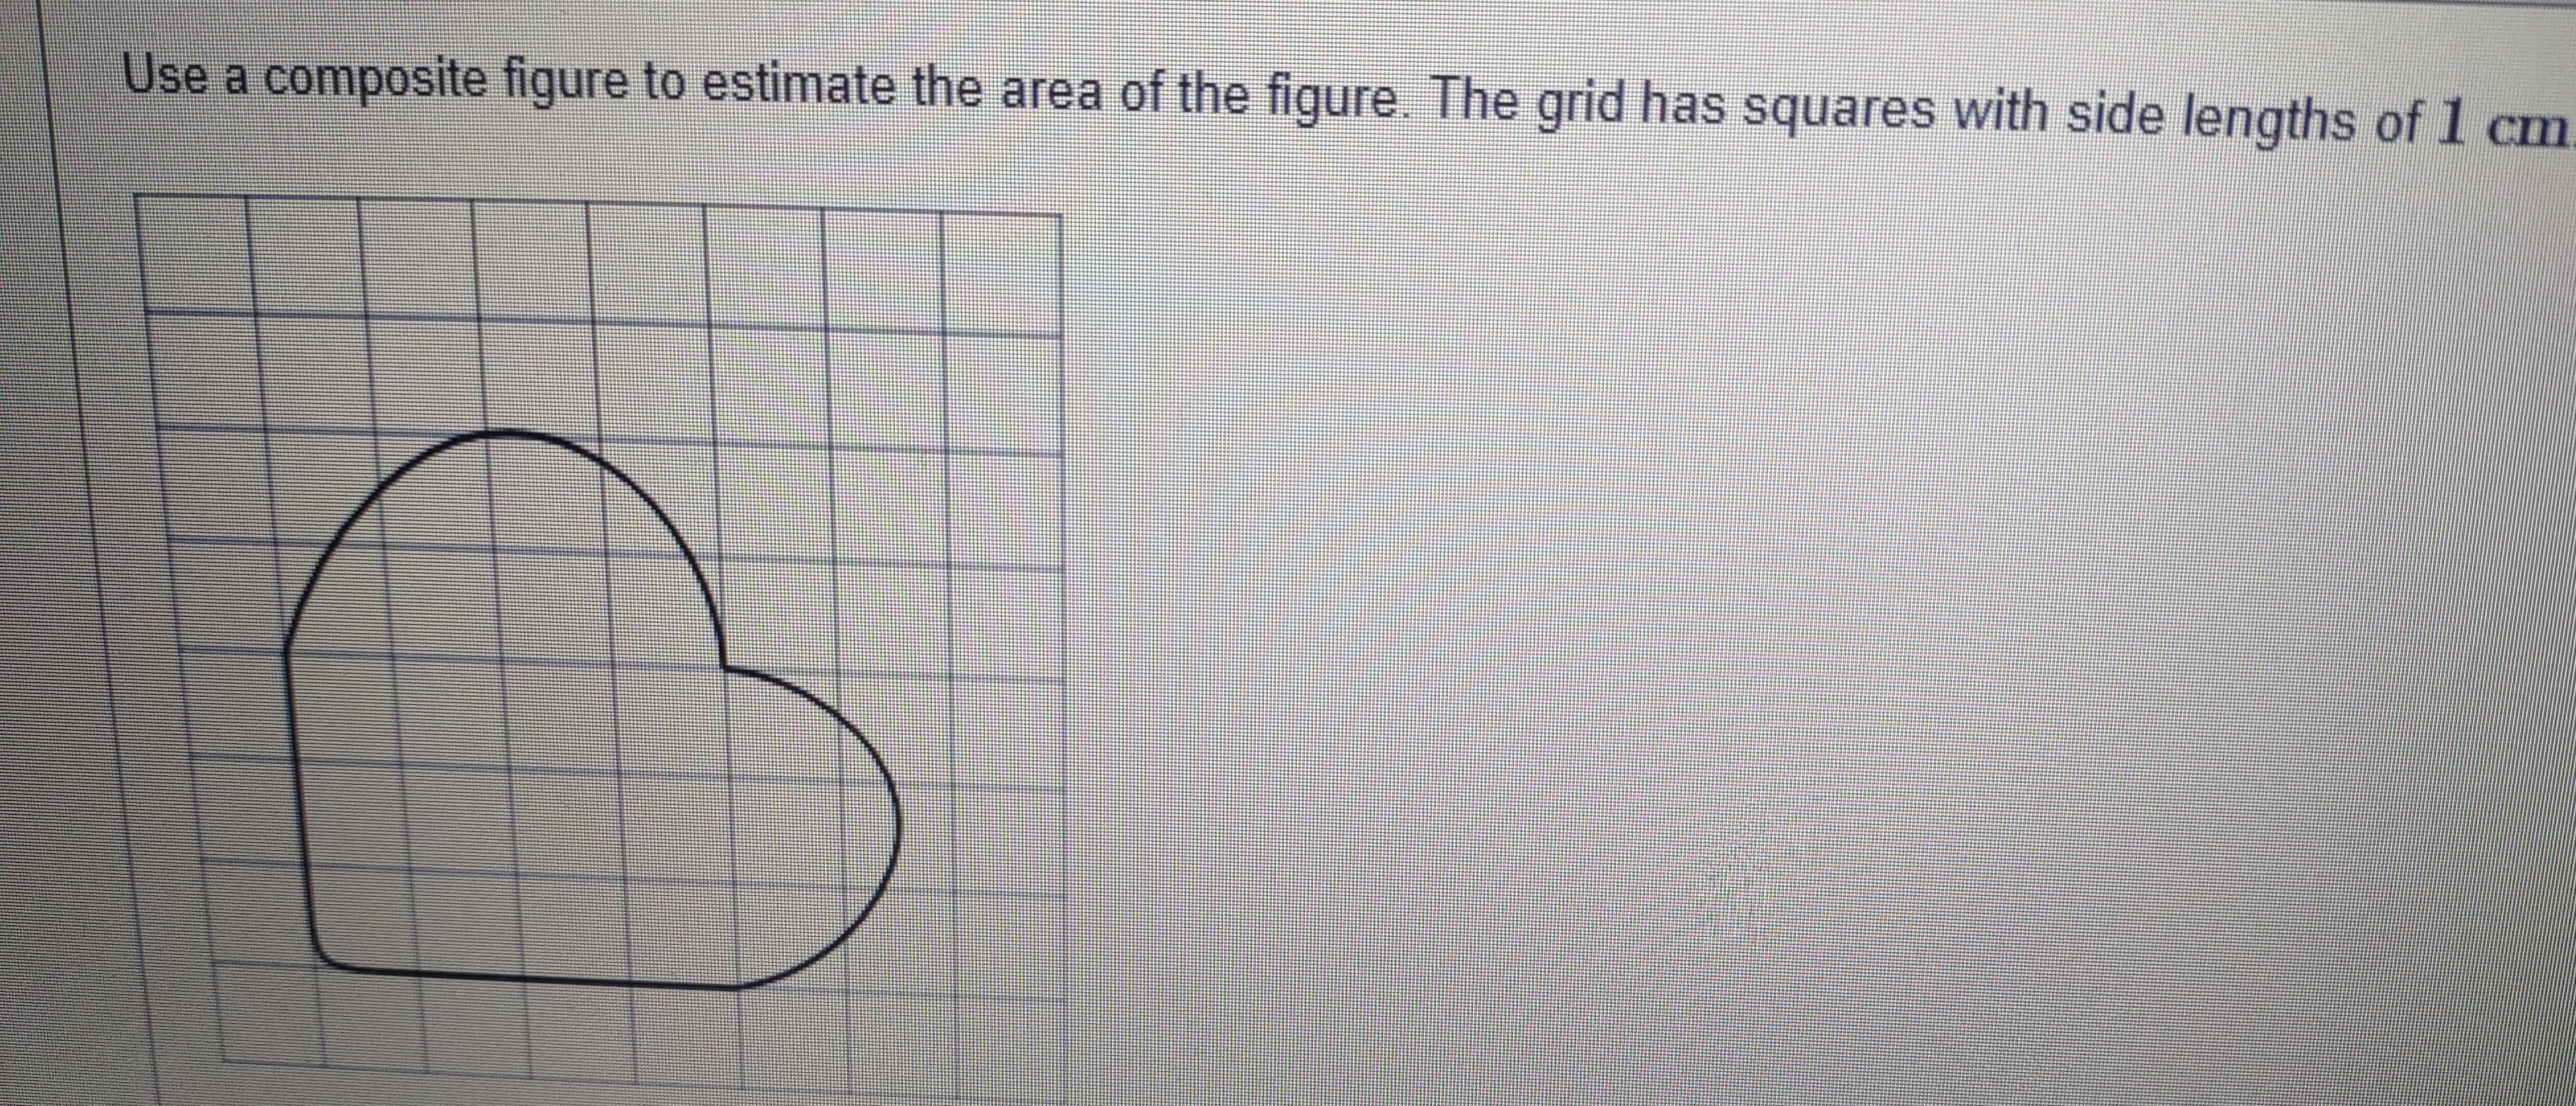 Use A Composite Figure To Estimate The Area Of The Figure. The Grid Has Squares With Side Lengths Of